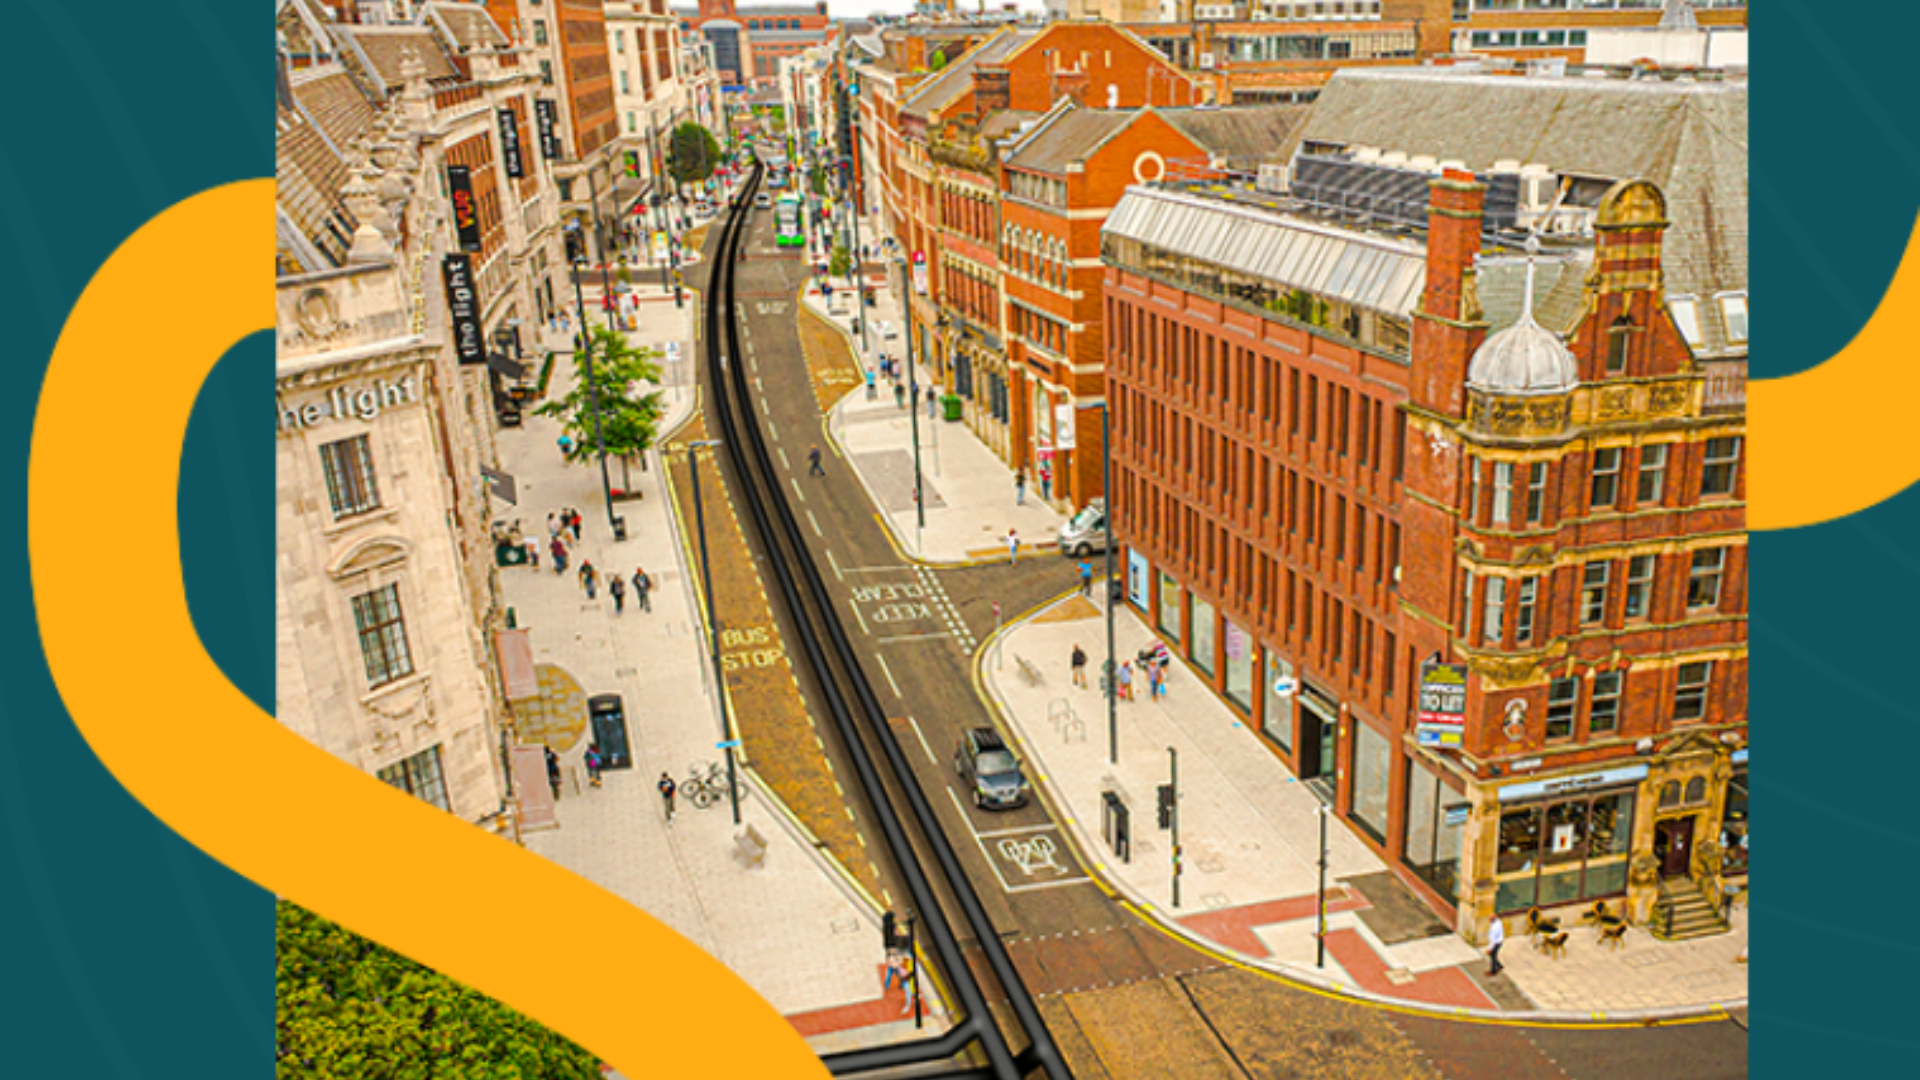 An image of Leeds Headrow with yellow graphics of pipes running either side of the image